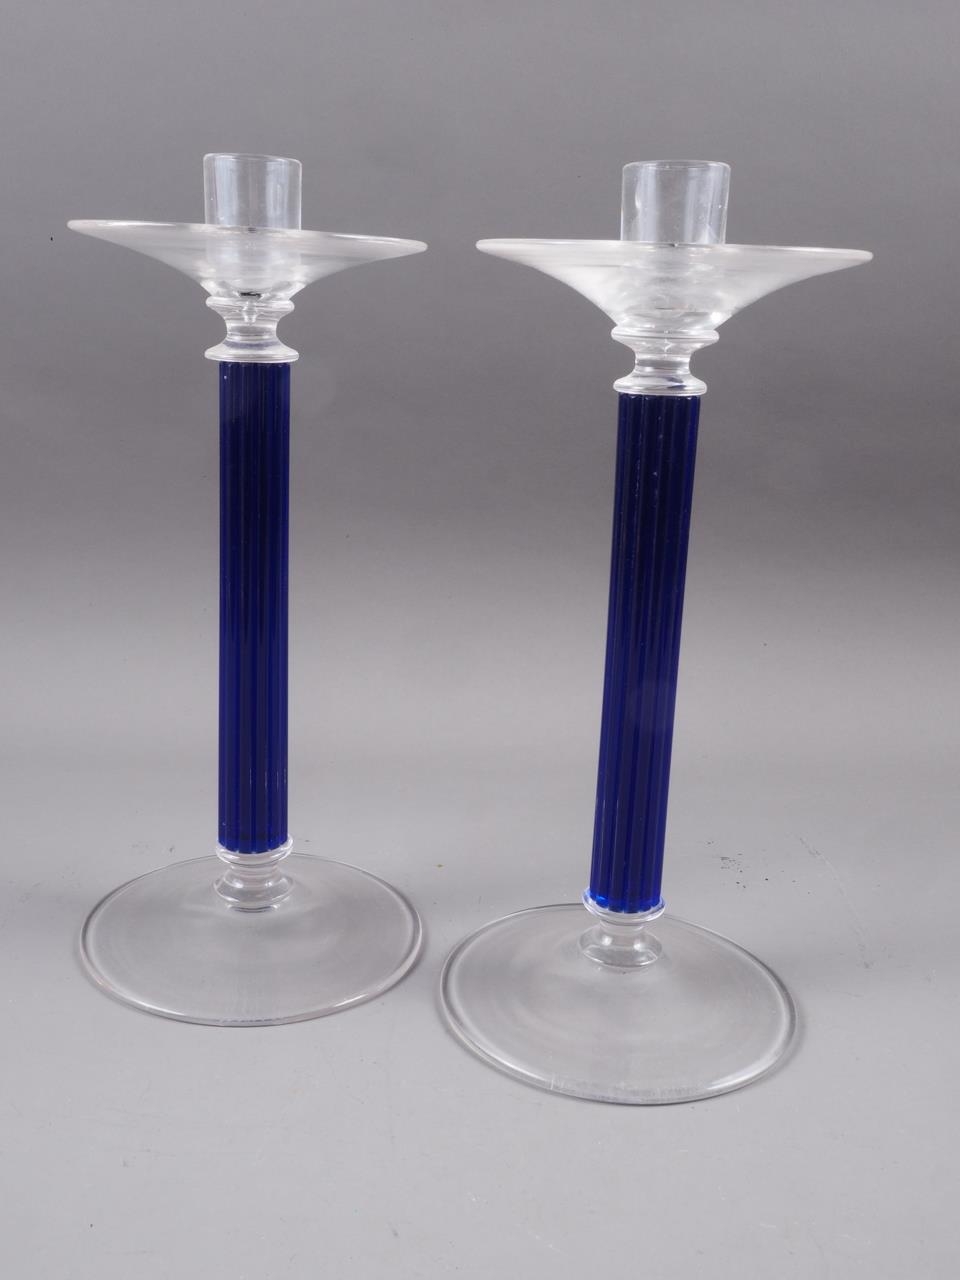 A pair of Murano glass candlesticks with blue ribbed stems, 13" high - Image 2 of 2